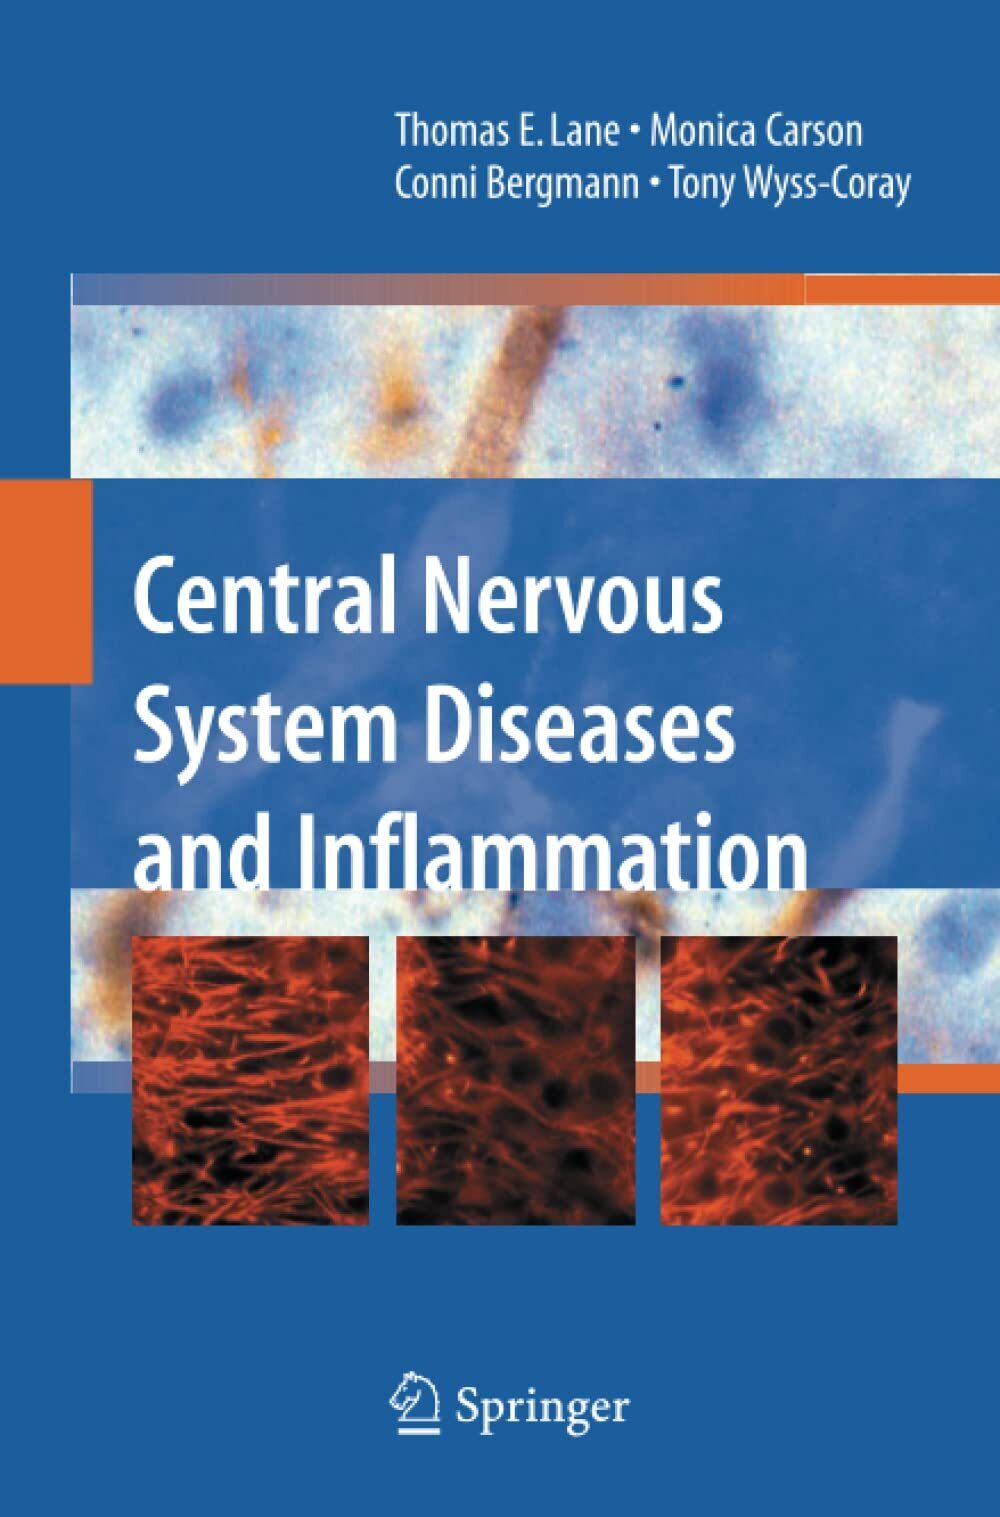 Central Nervous System Diseases and Inflammation - Thomas E. Lane -Springer,2010